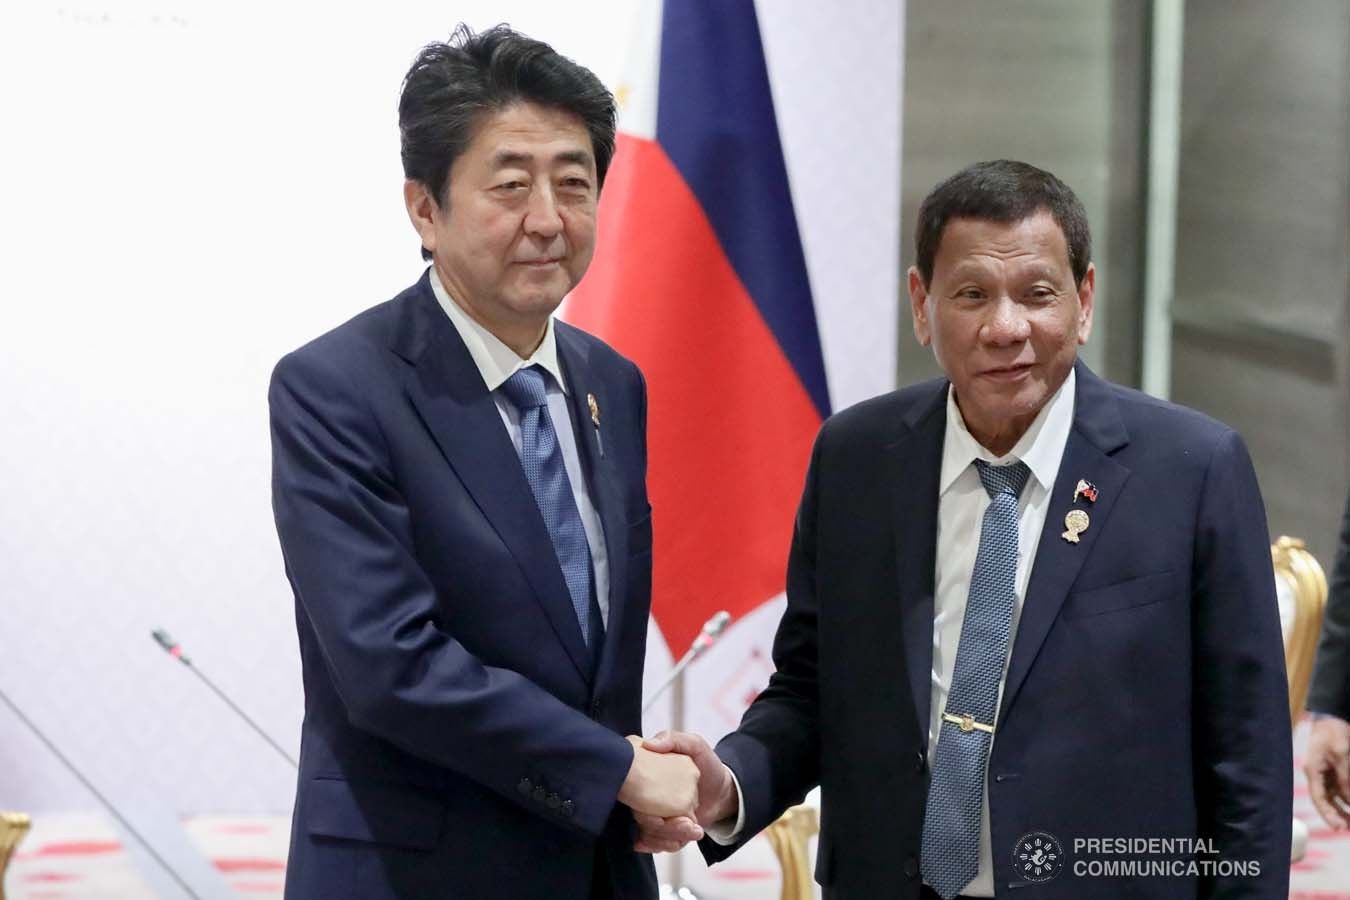 President Rodrigo Duterte and Japanese Prime Minister Shinzo Abe pose for posterity prior to the start of their bilateral meeting at the Impact Exhibition and Convention Center in Nonthaburi, Thailand on Nov. 4, 2019.